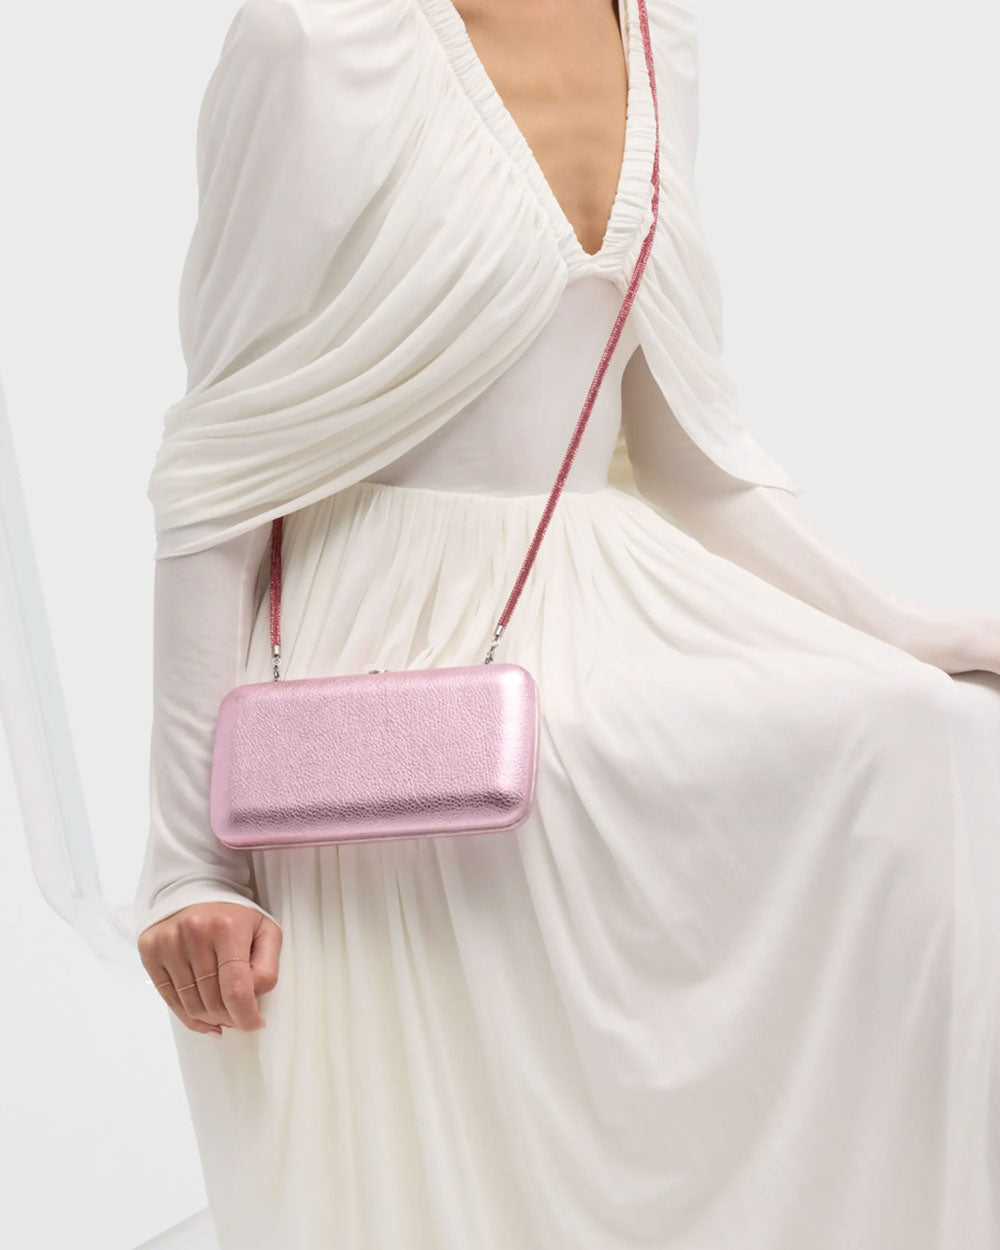 Finley Leather Clutch in Pink Metallic